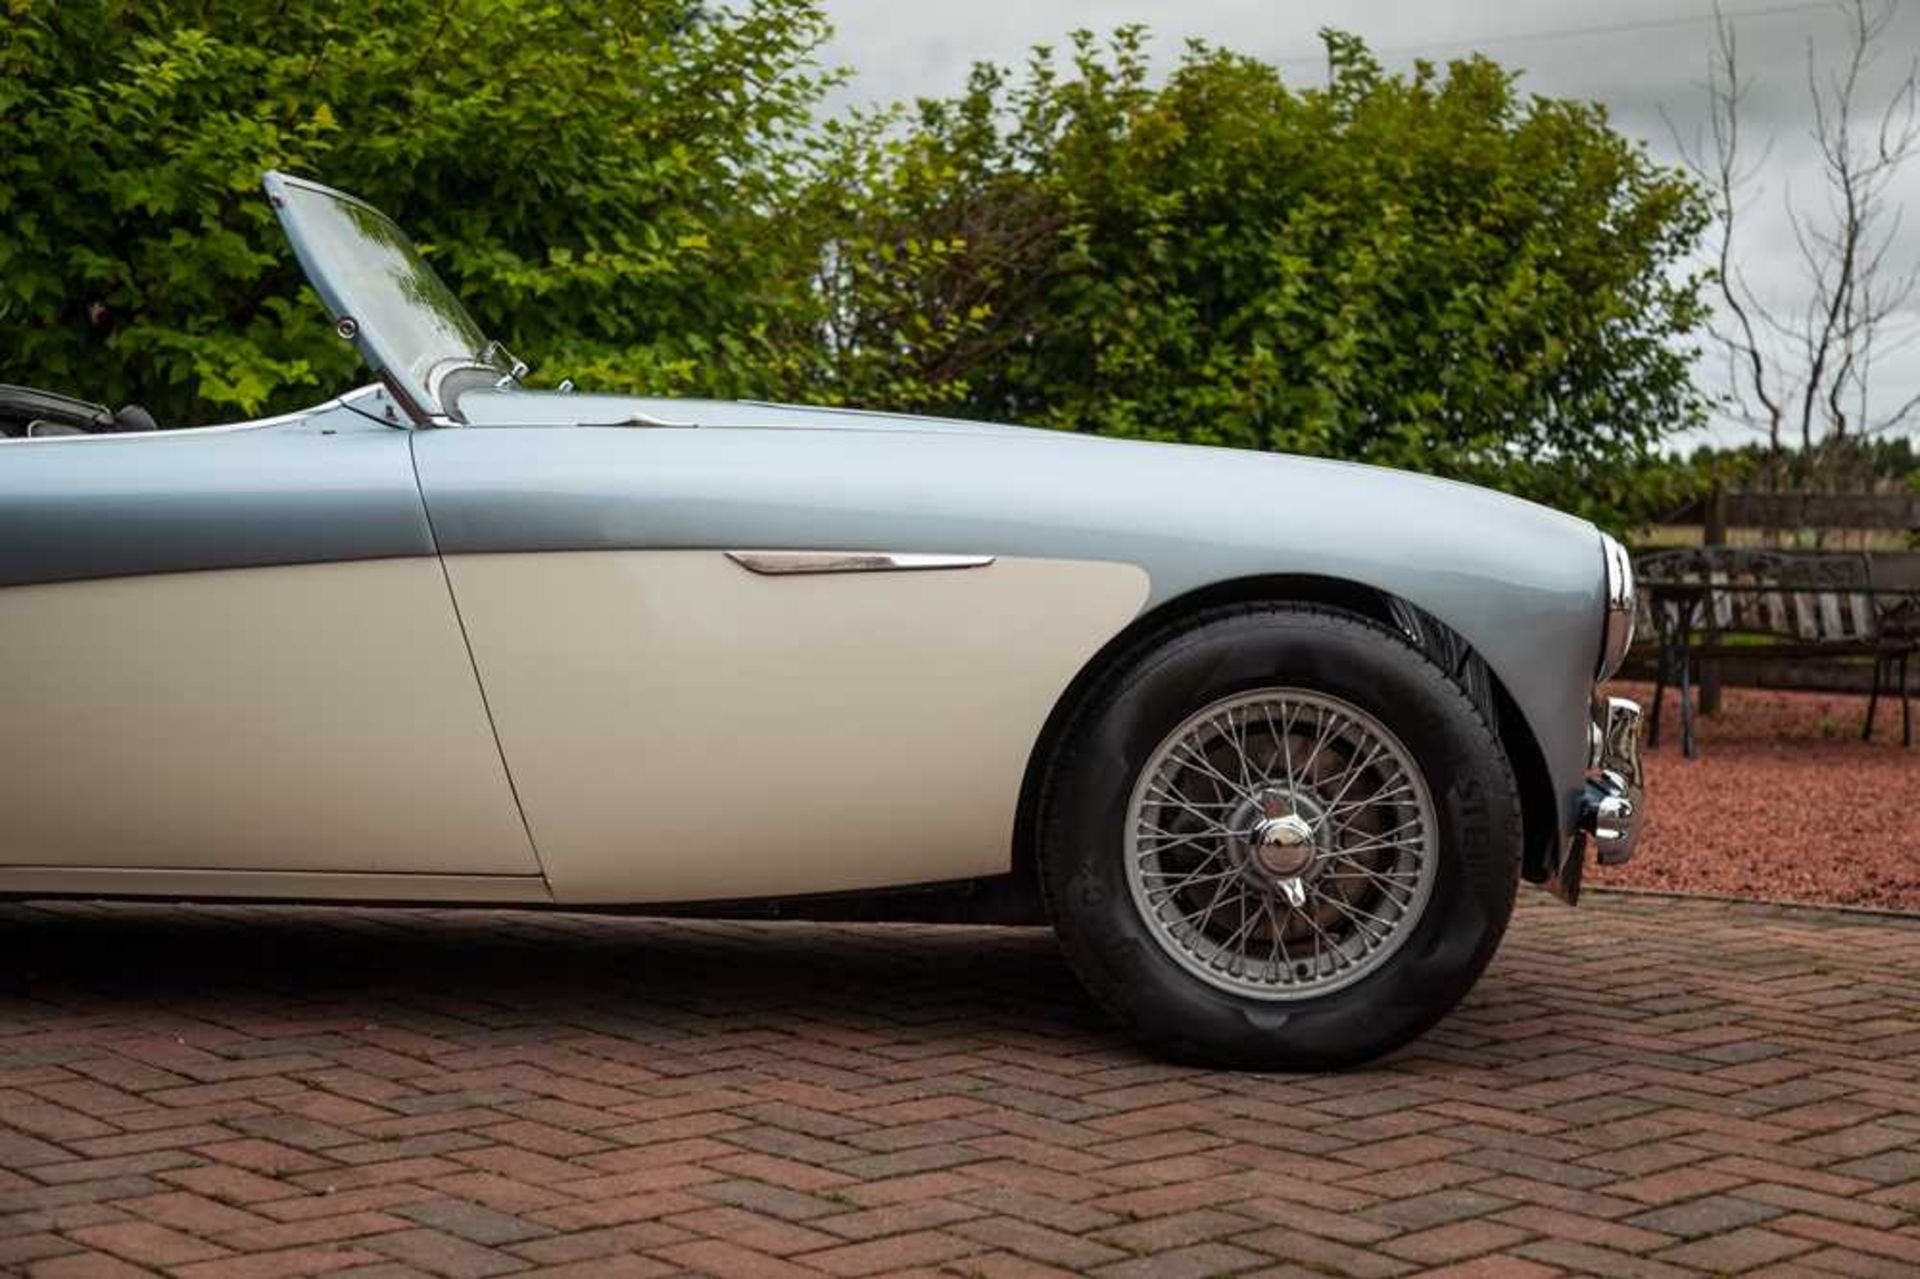 1955 Austin-Healey 100/4 Subtly Upgraded with 5-Speed Transmission and Front Disc Brakes - Image 51 of 54